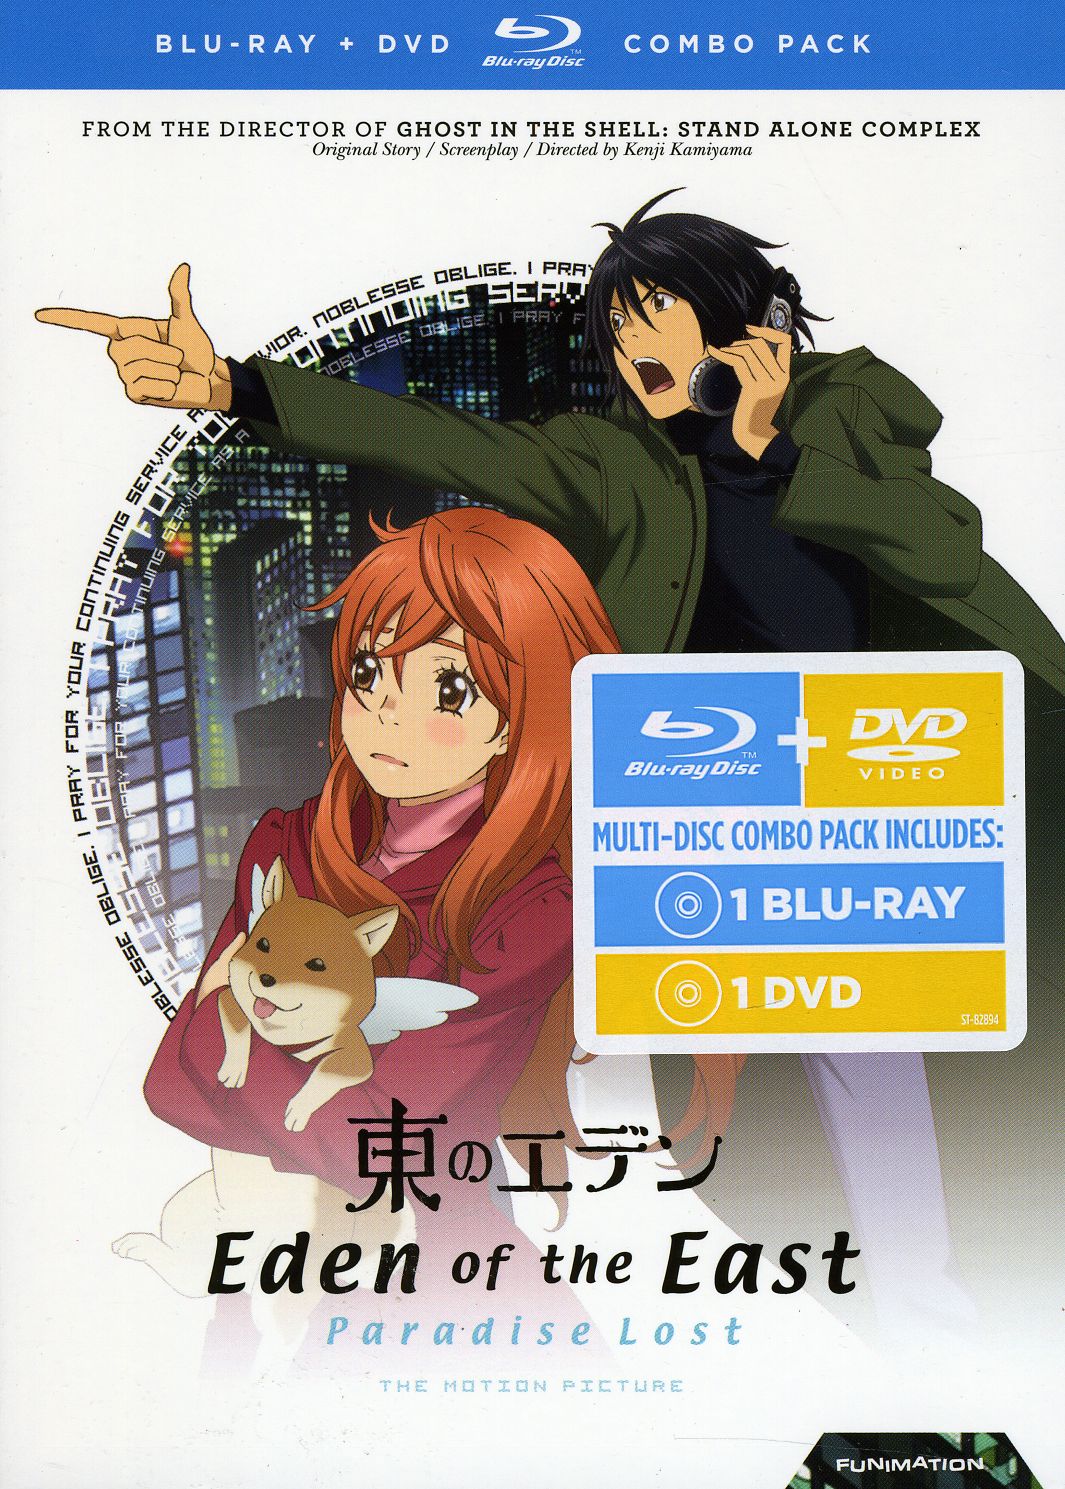 EDEN OF THE EAST: PARADISE LOST (2PC) (W/DVD)